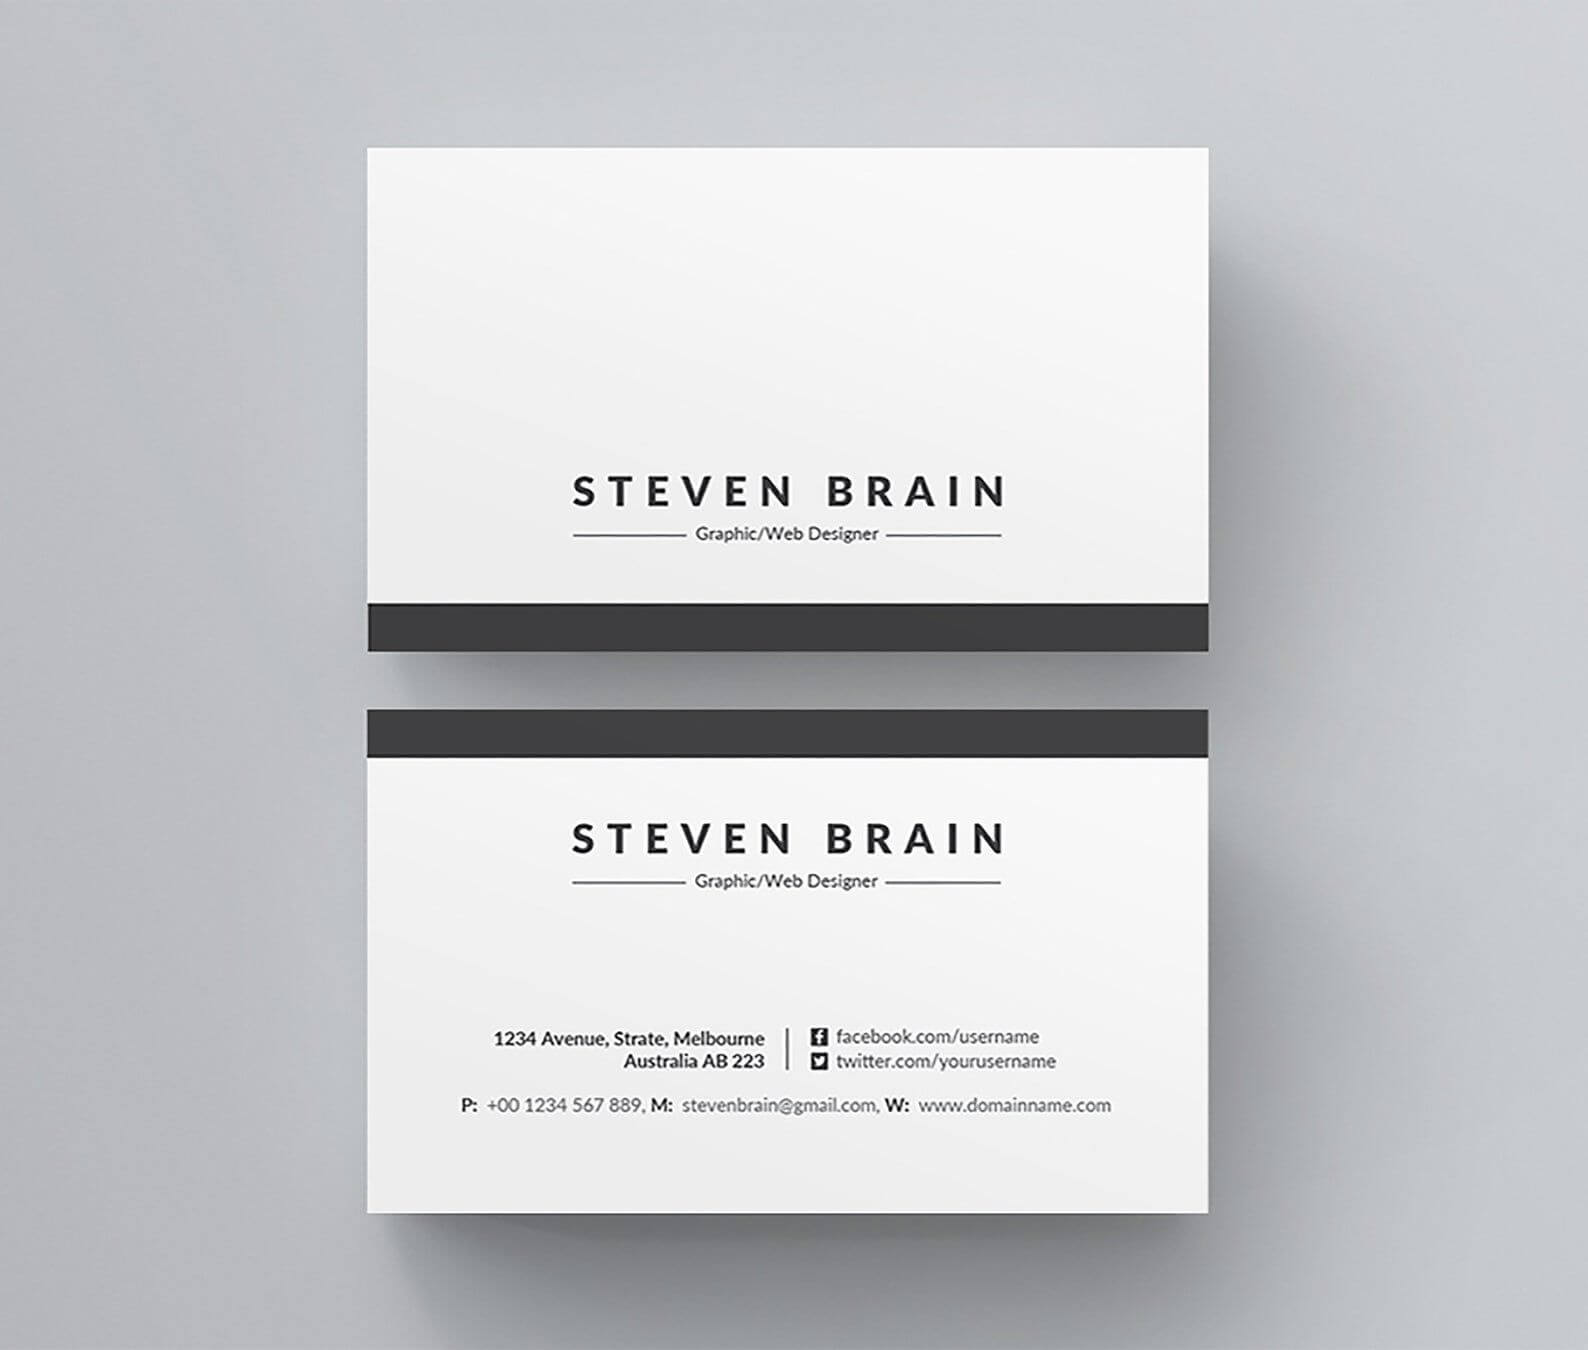 Business Card Template Business Card Design Ms Word Business Within Microsoft Templates For Business Cards